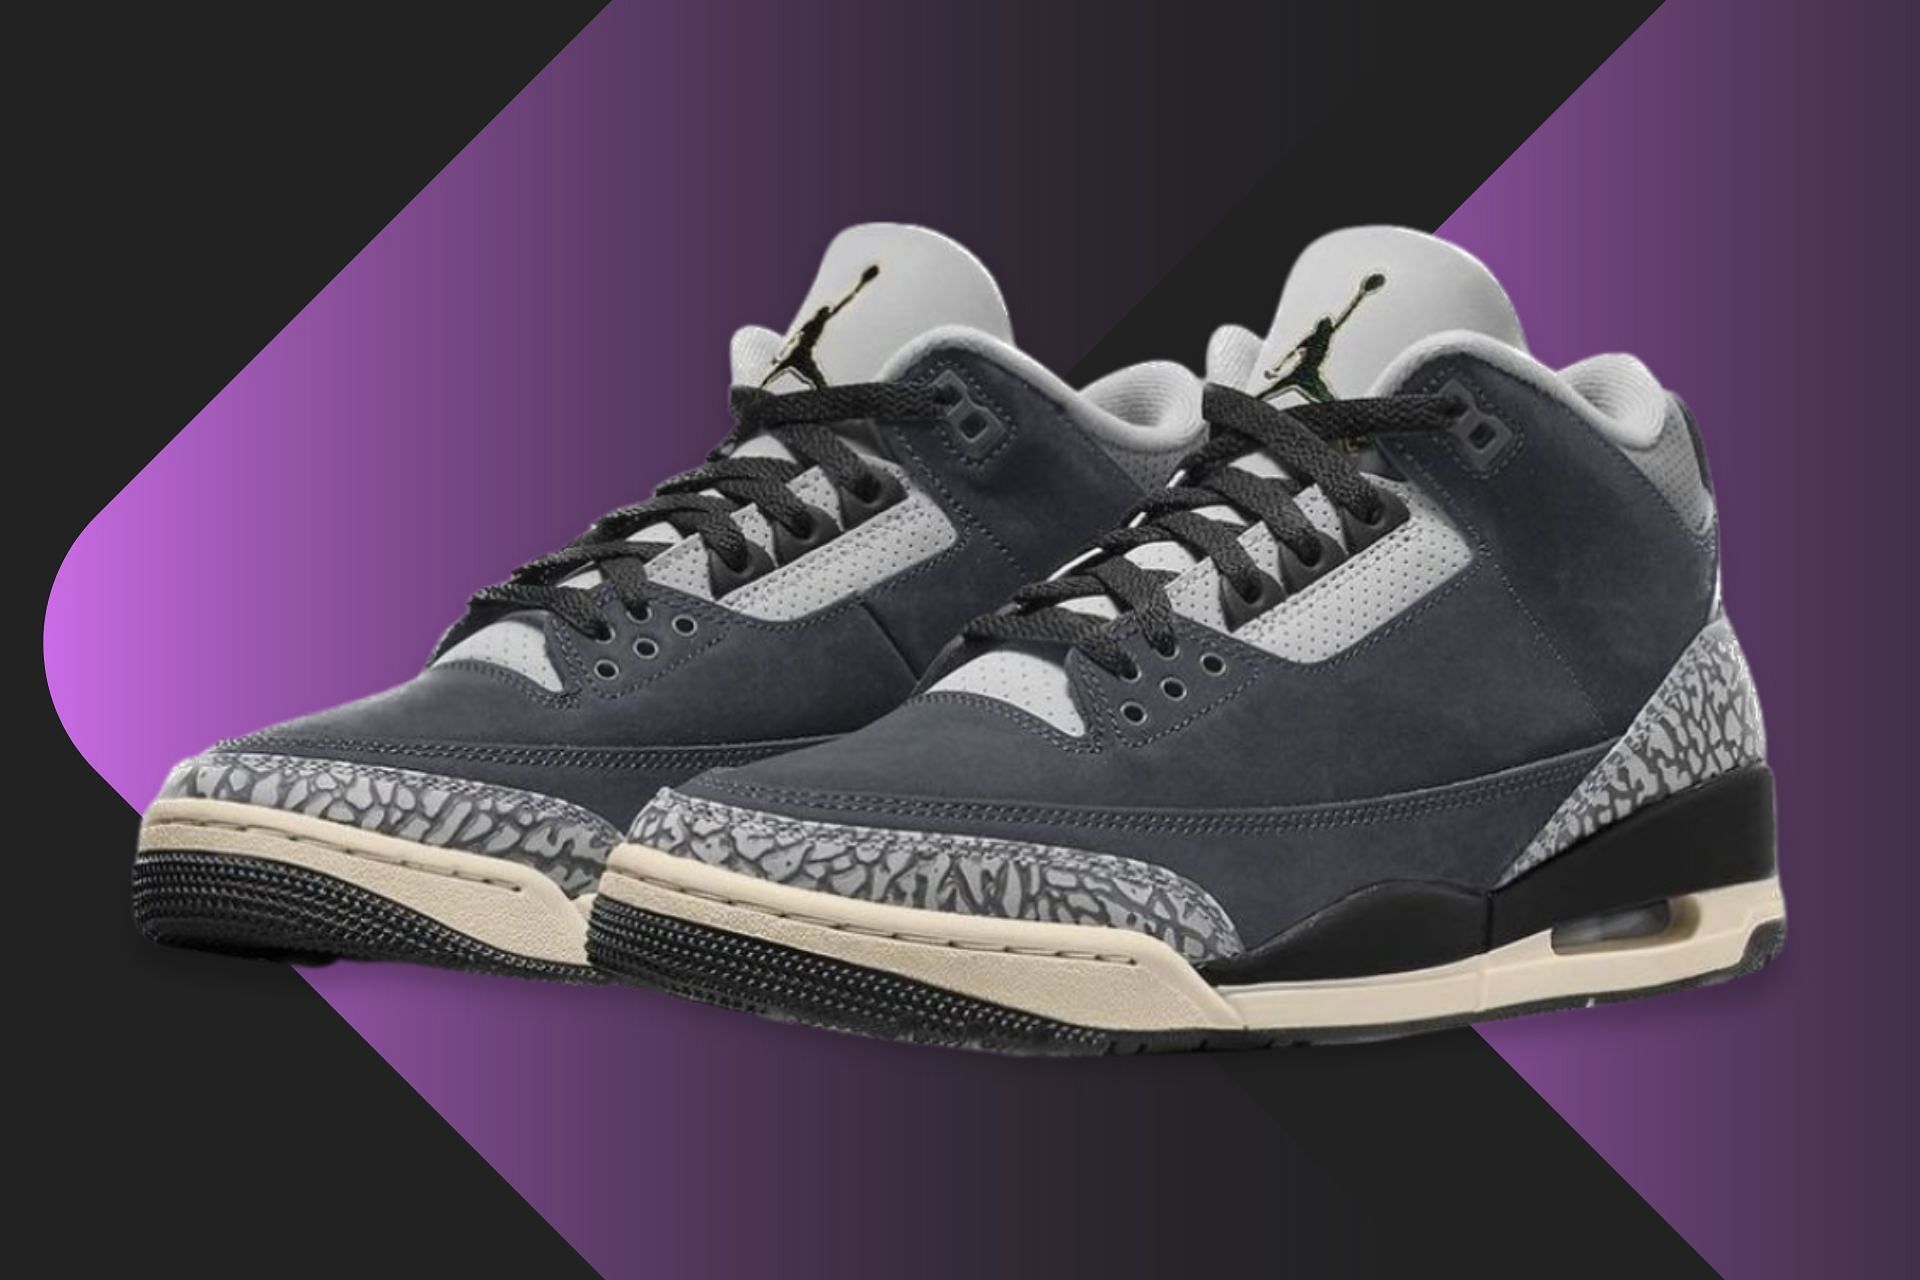 Nike: Air Jordan 3 Retro “Off Noir Cement” shoes: to buy, price, and more details explored